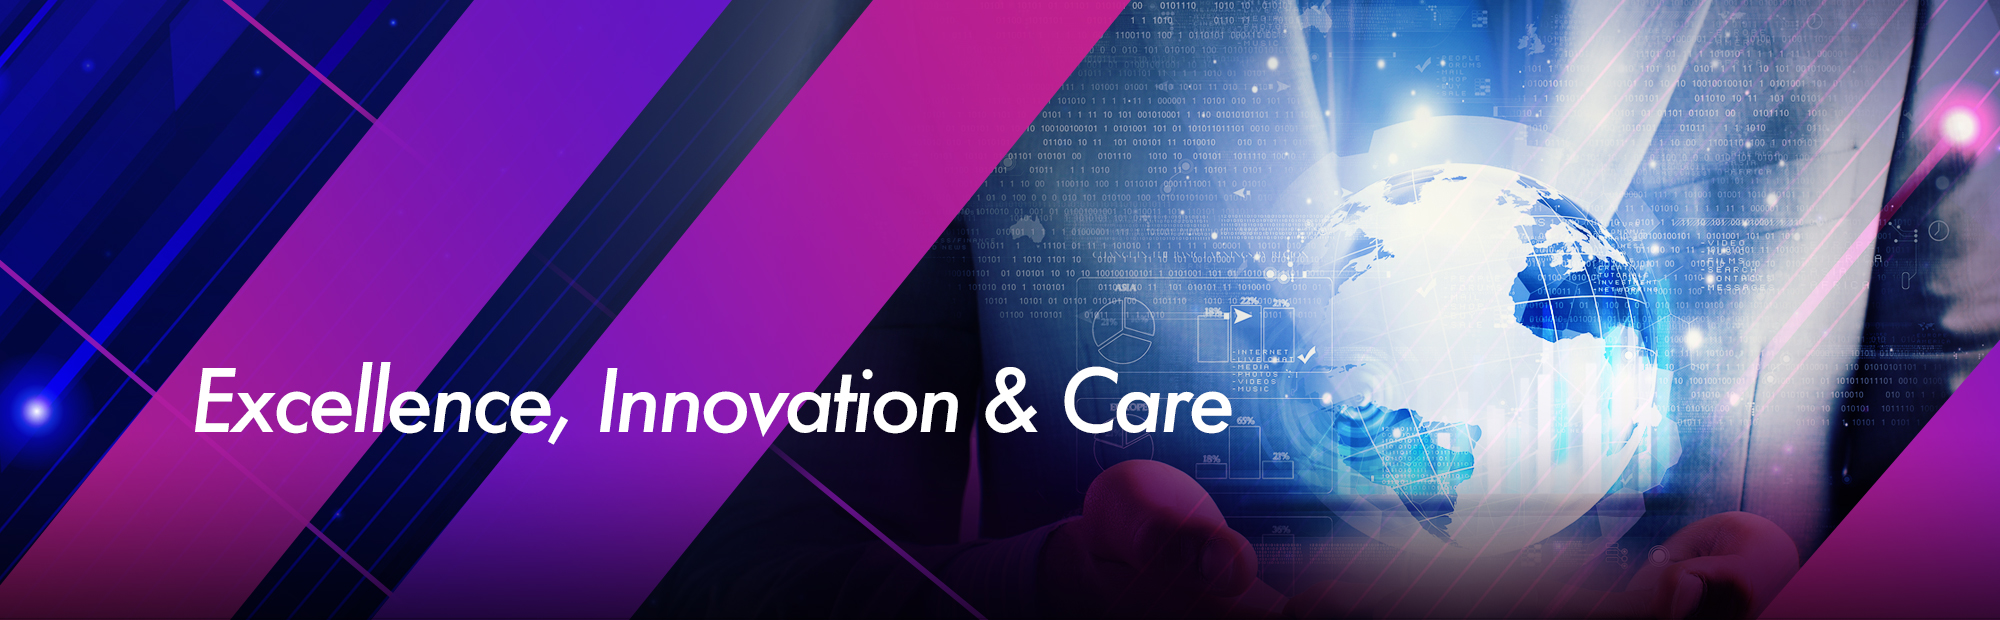 Excellence, Innovation & Care